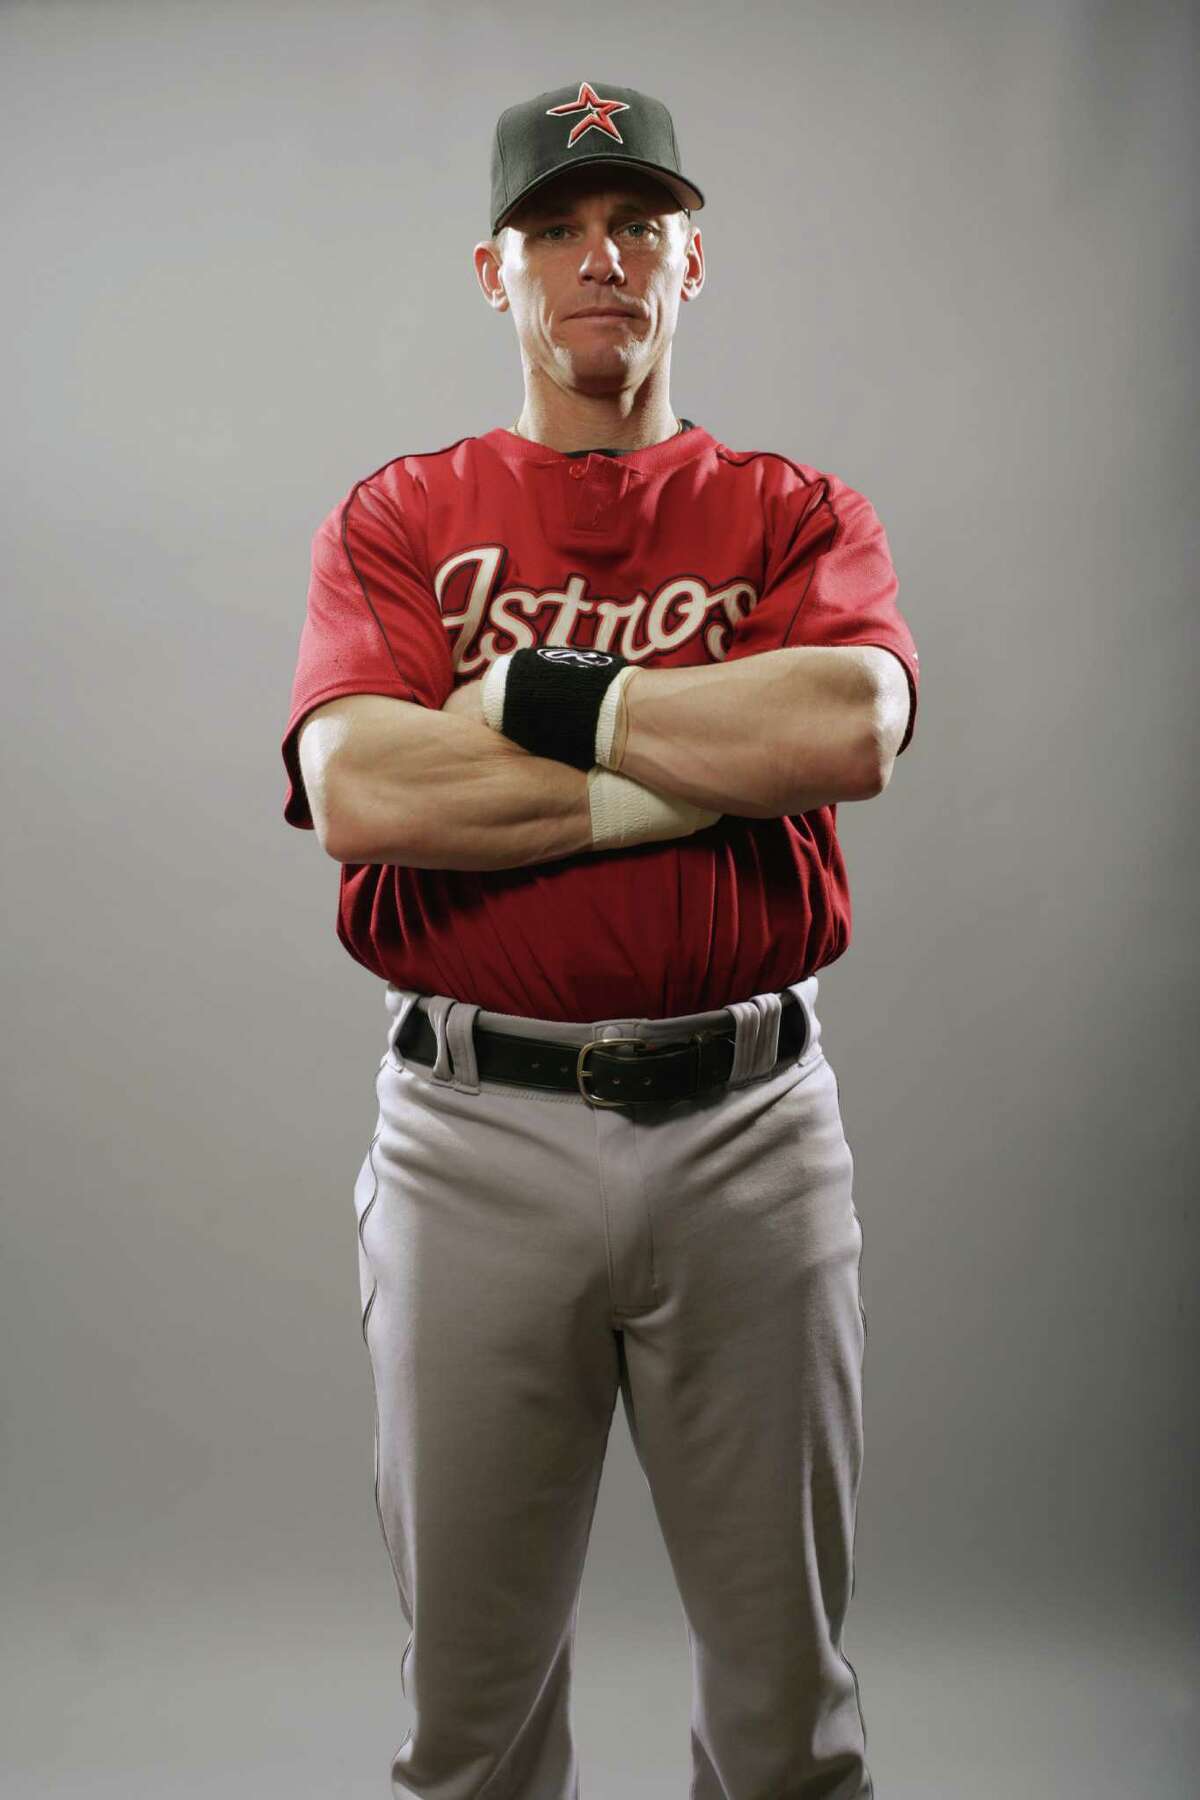 Craig Biggio poses for a portrait during the Houston Astros Photo Day on February 25, 2006 at Osceola County Stadium in Kissimmee, Florida. (Photo by Chris Stanford/Getty Images)